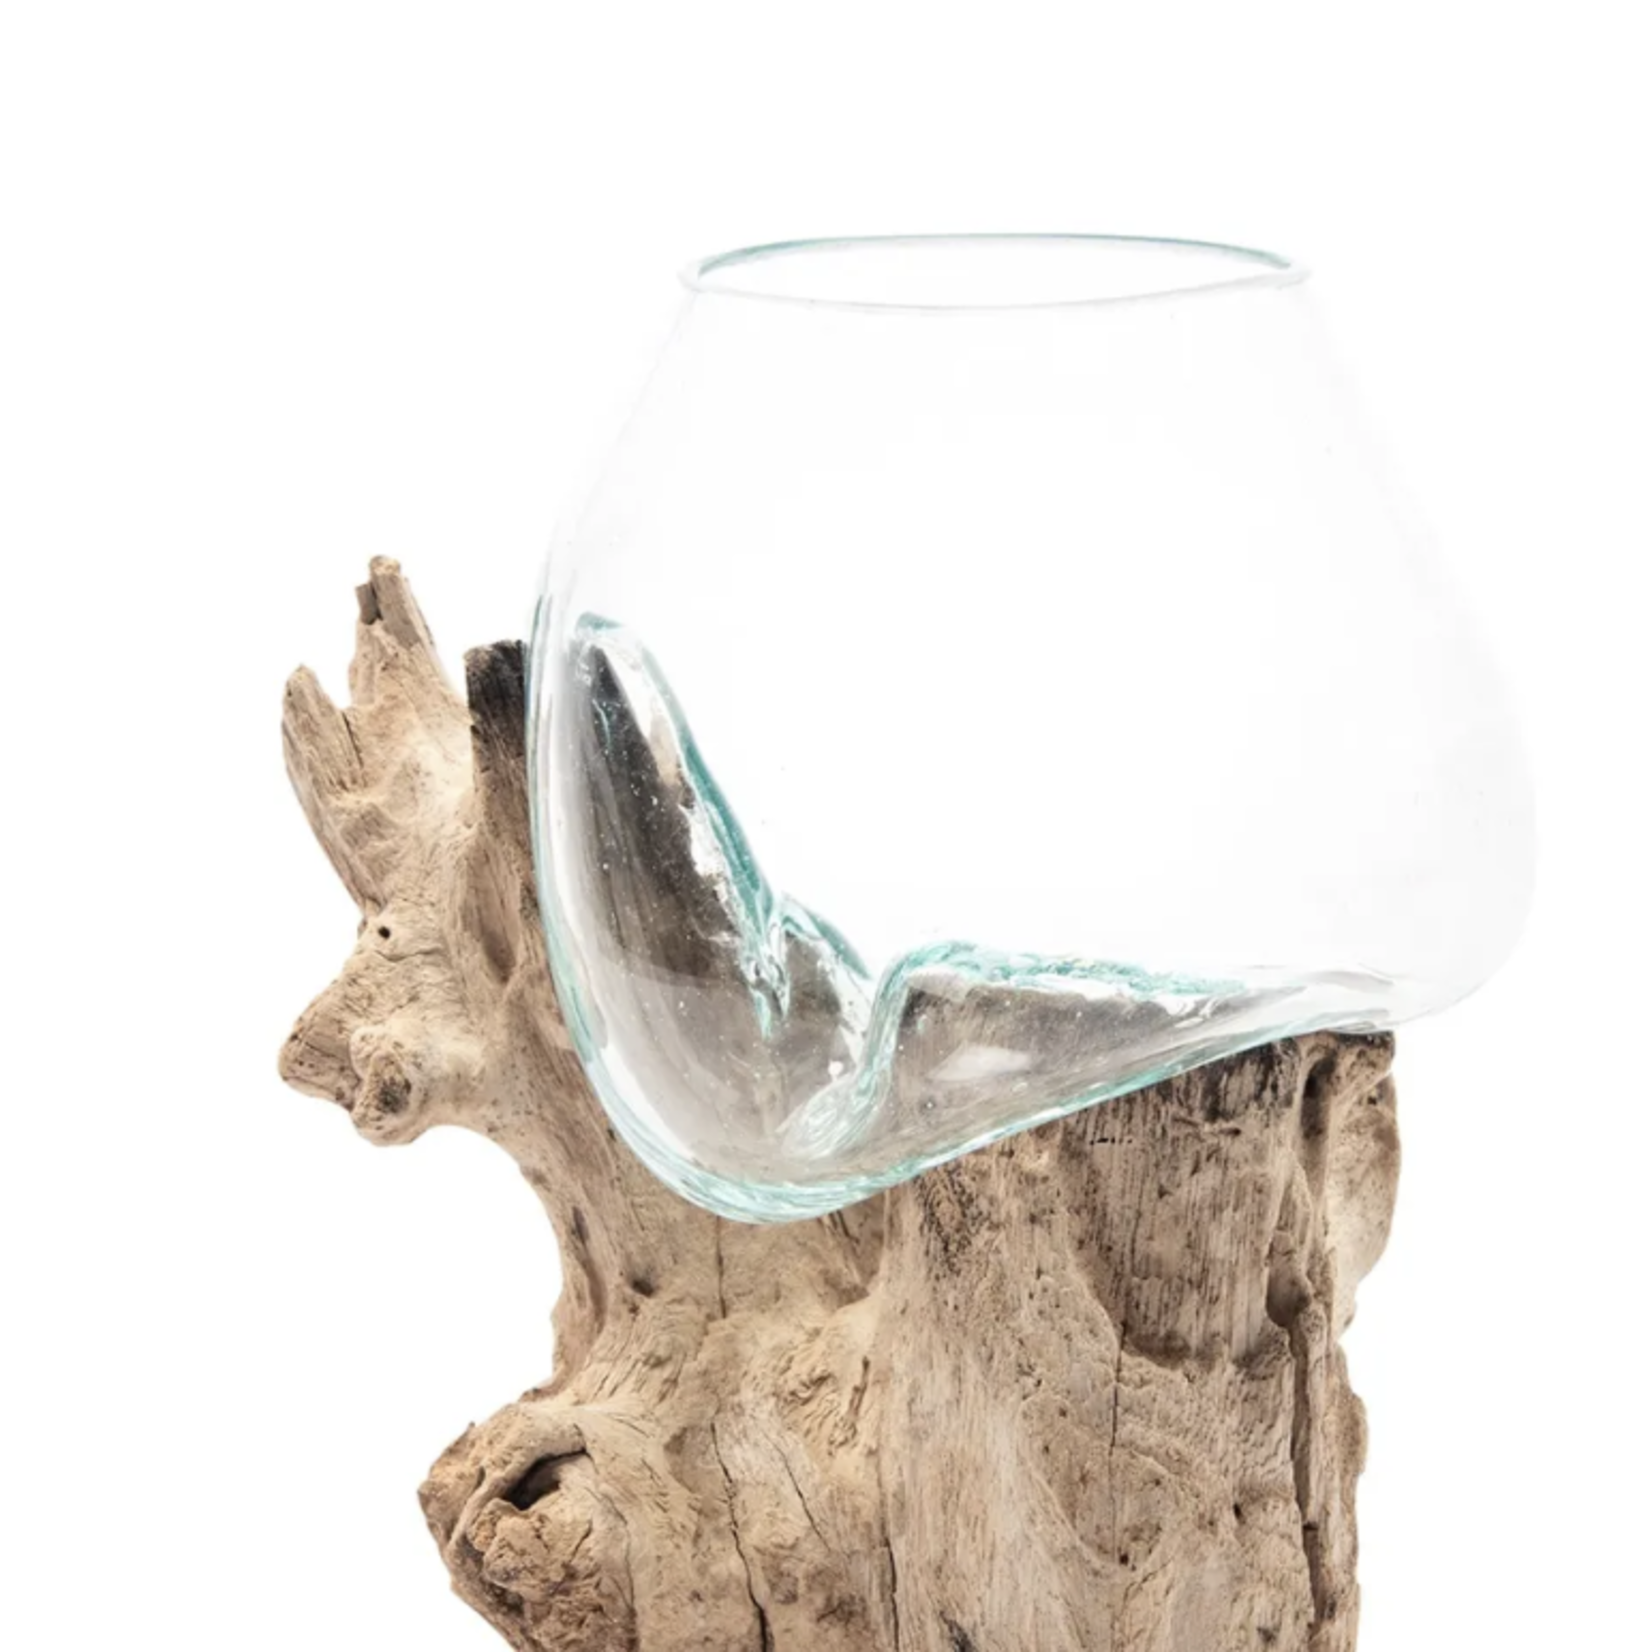 Outside The Box 8" Hand Blown Glass Vase On Driftwood Base - XXXS